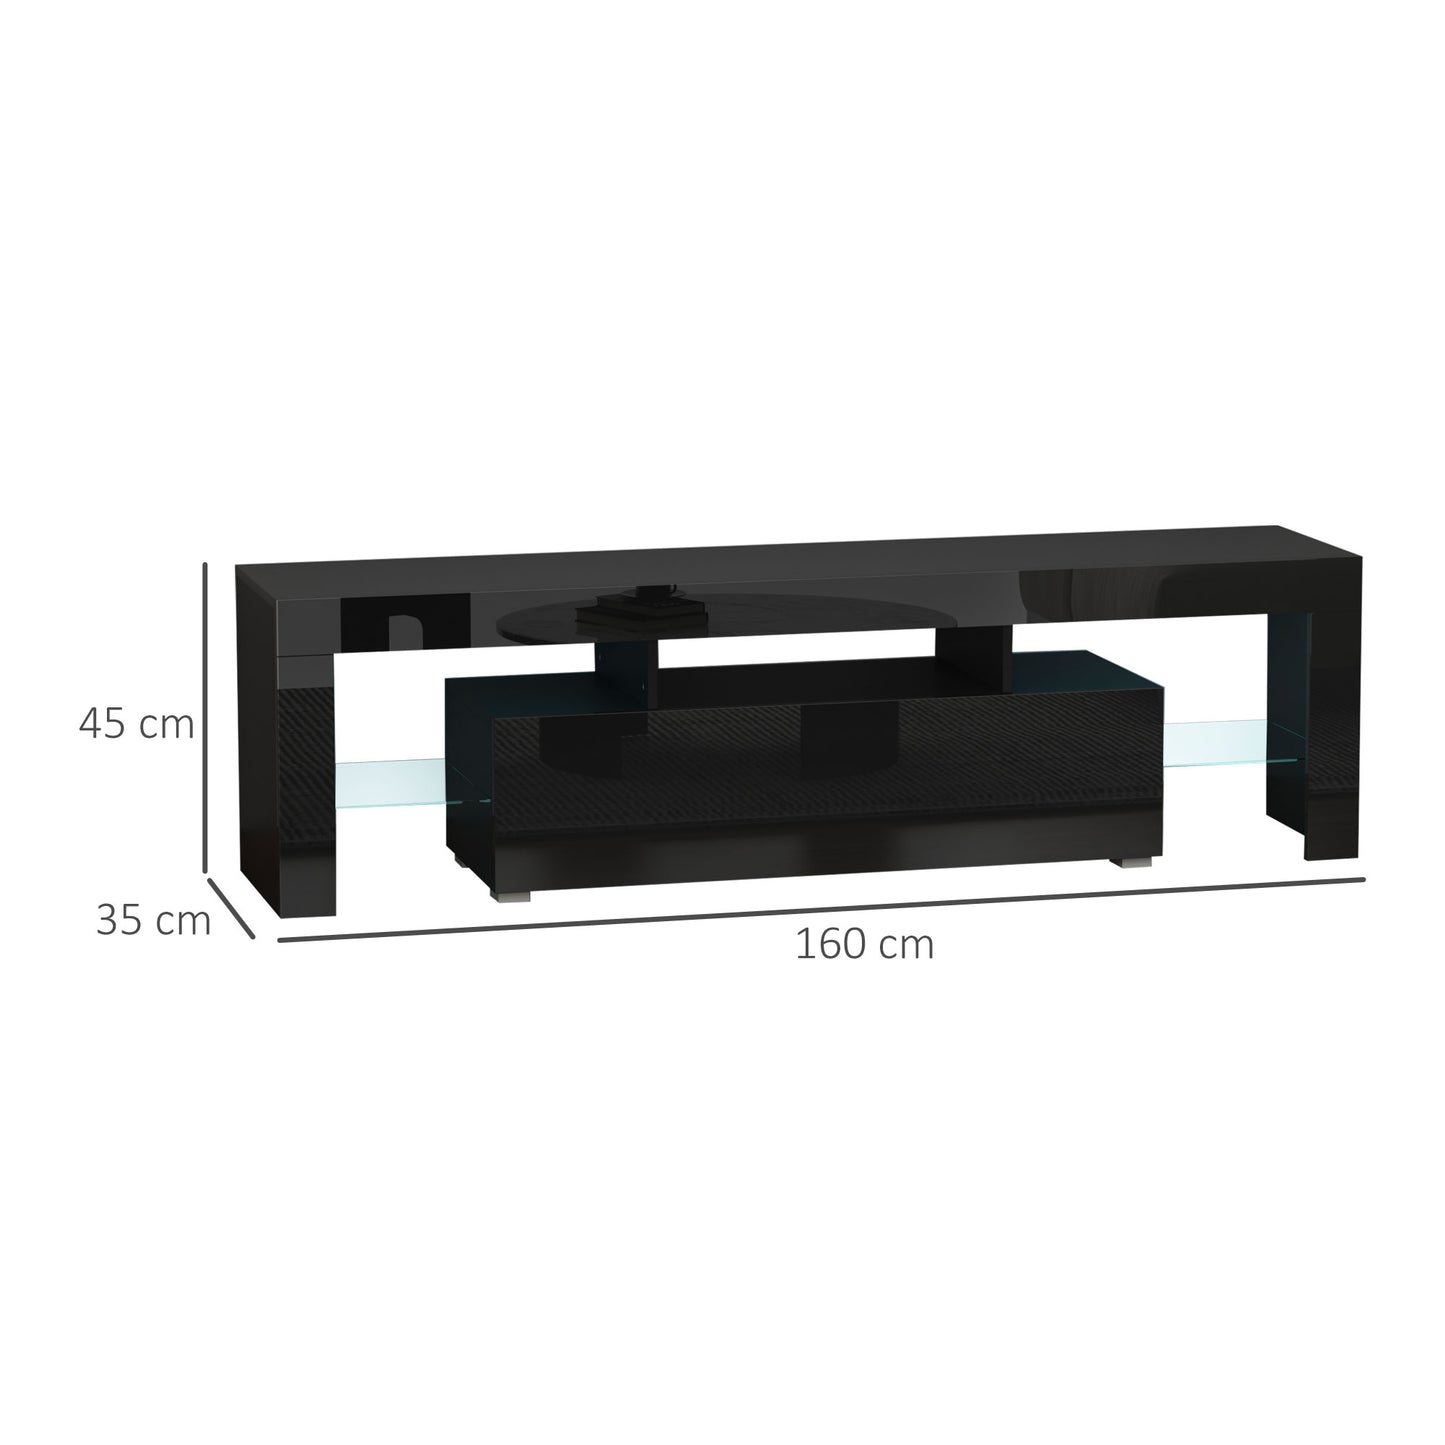 HOMCOM High Gloss TV Stand Cabinet with LED RGB Lights and Remote Control for TVs up to 65", Media TV Console Table with Storage Compartment, Black W/ Lights,